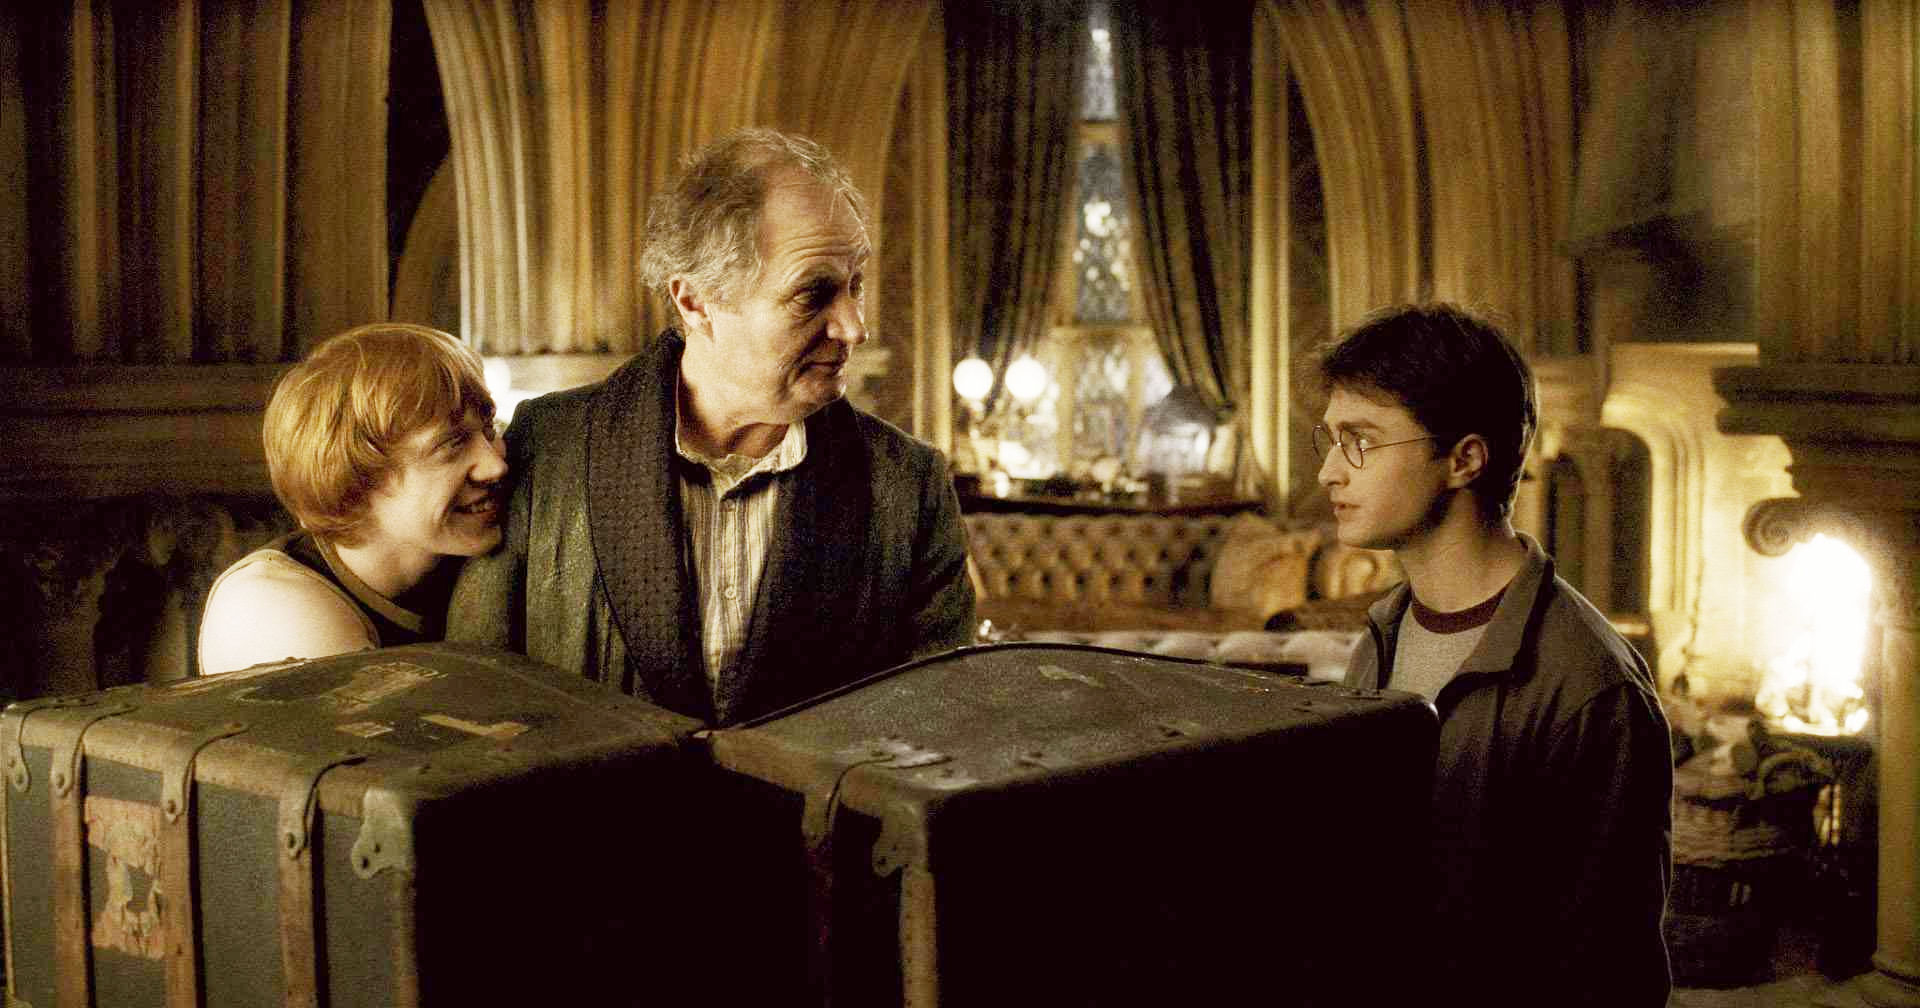 Rupert Grint, Jim Broadbent and Daniel Radcliffe in Warner Bros' Harry Potter and the Half-Blood Prince (2009)